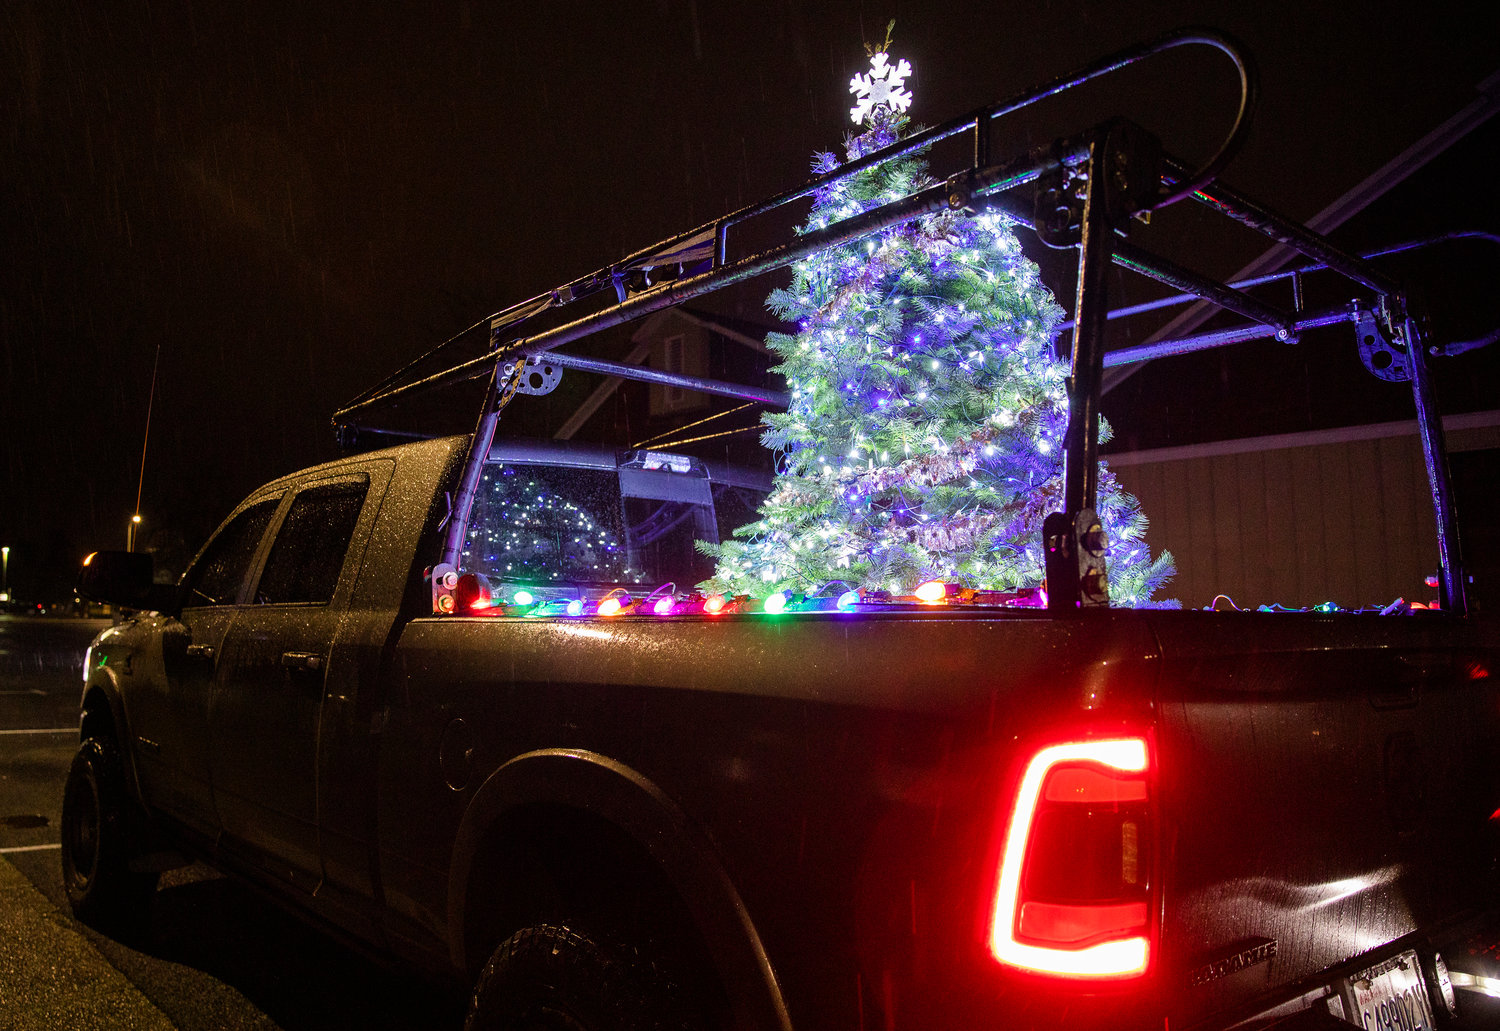 A tree is illuminated with Christmas lights inside the bed of a truck parked outside Borst Park Thursday night in Centralia.